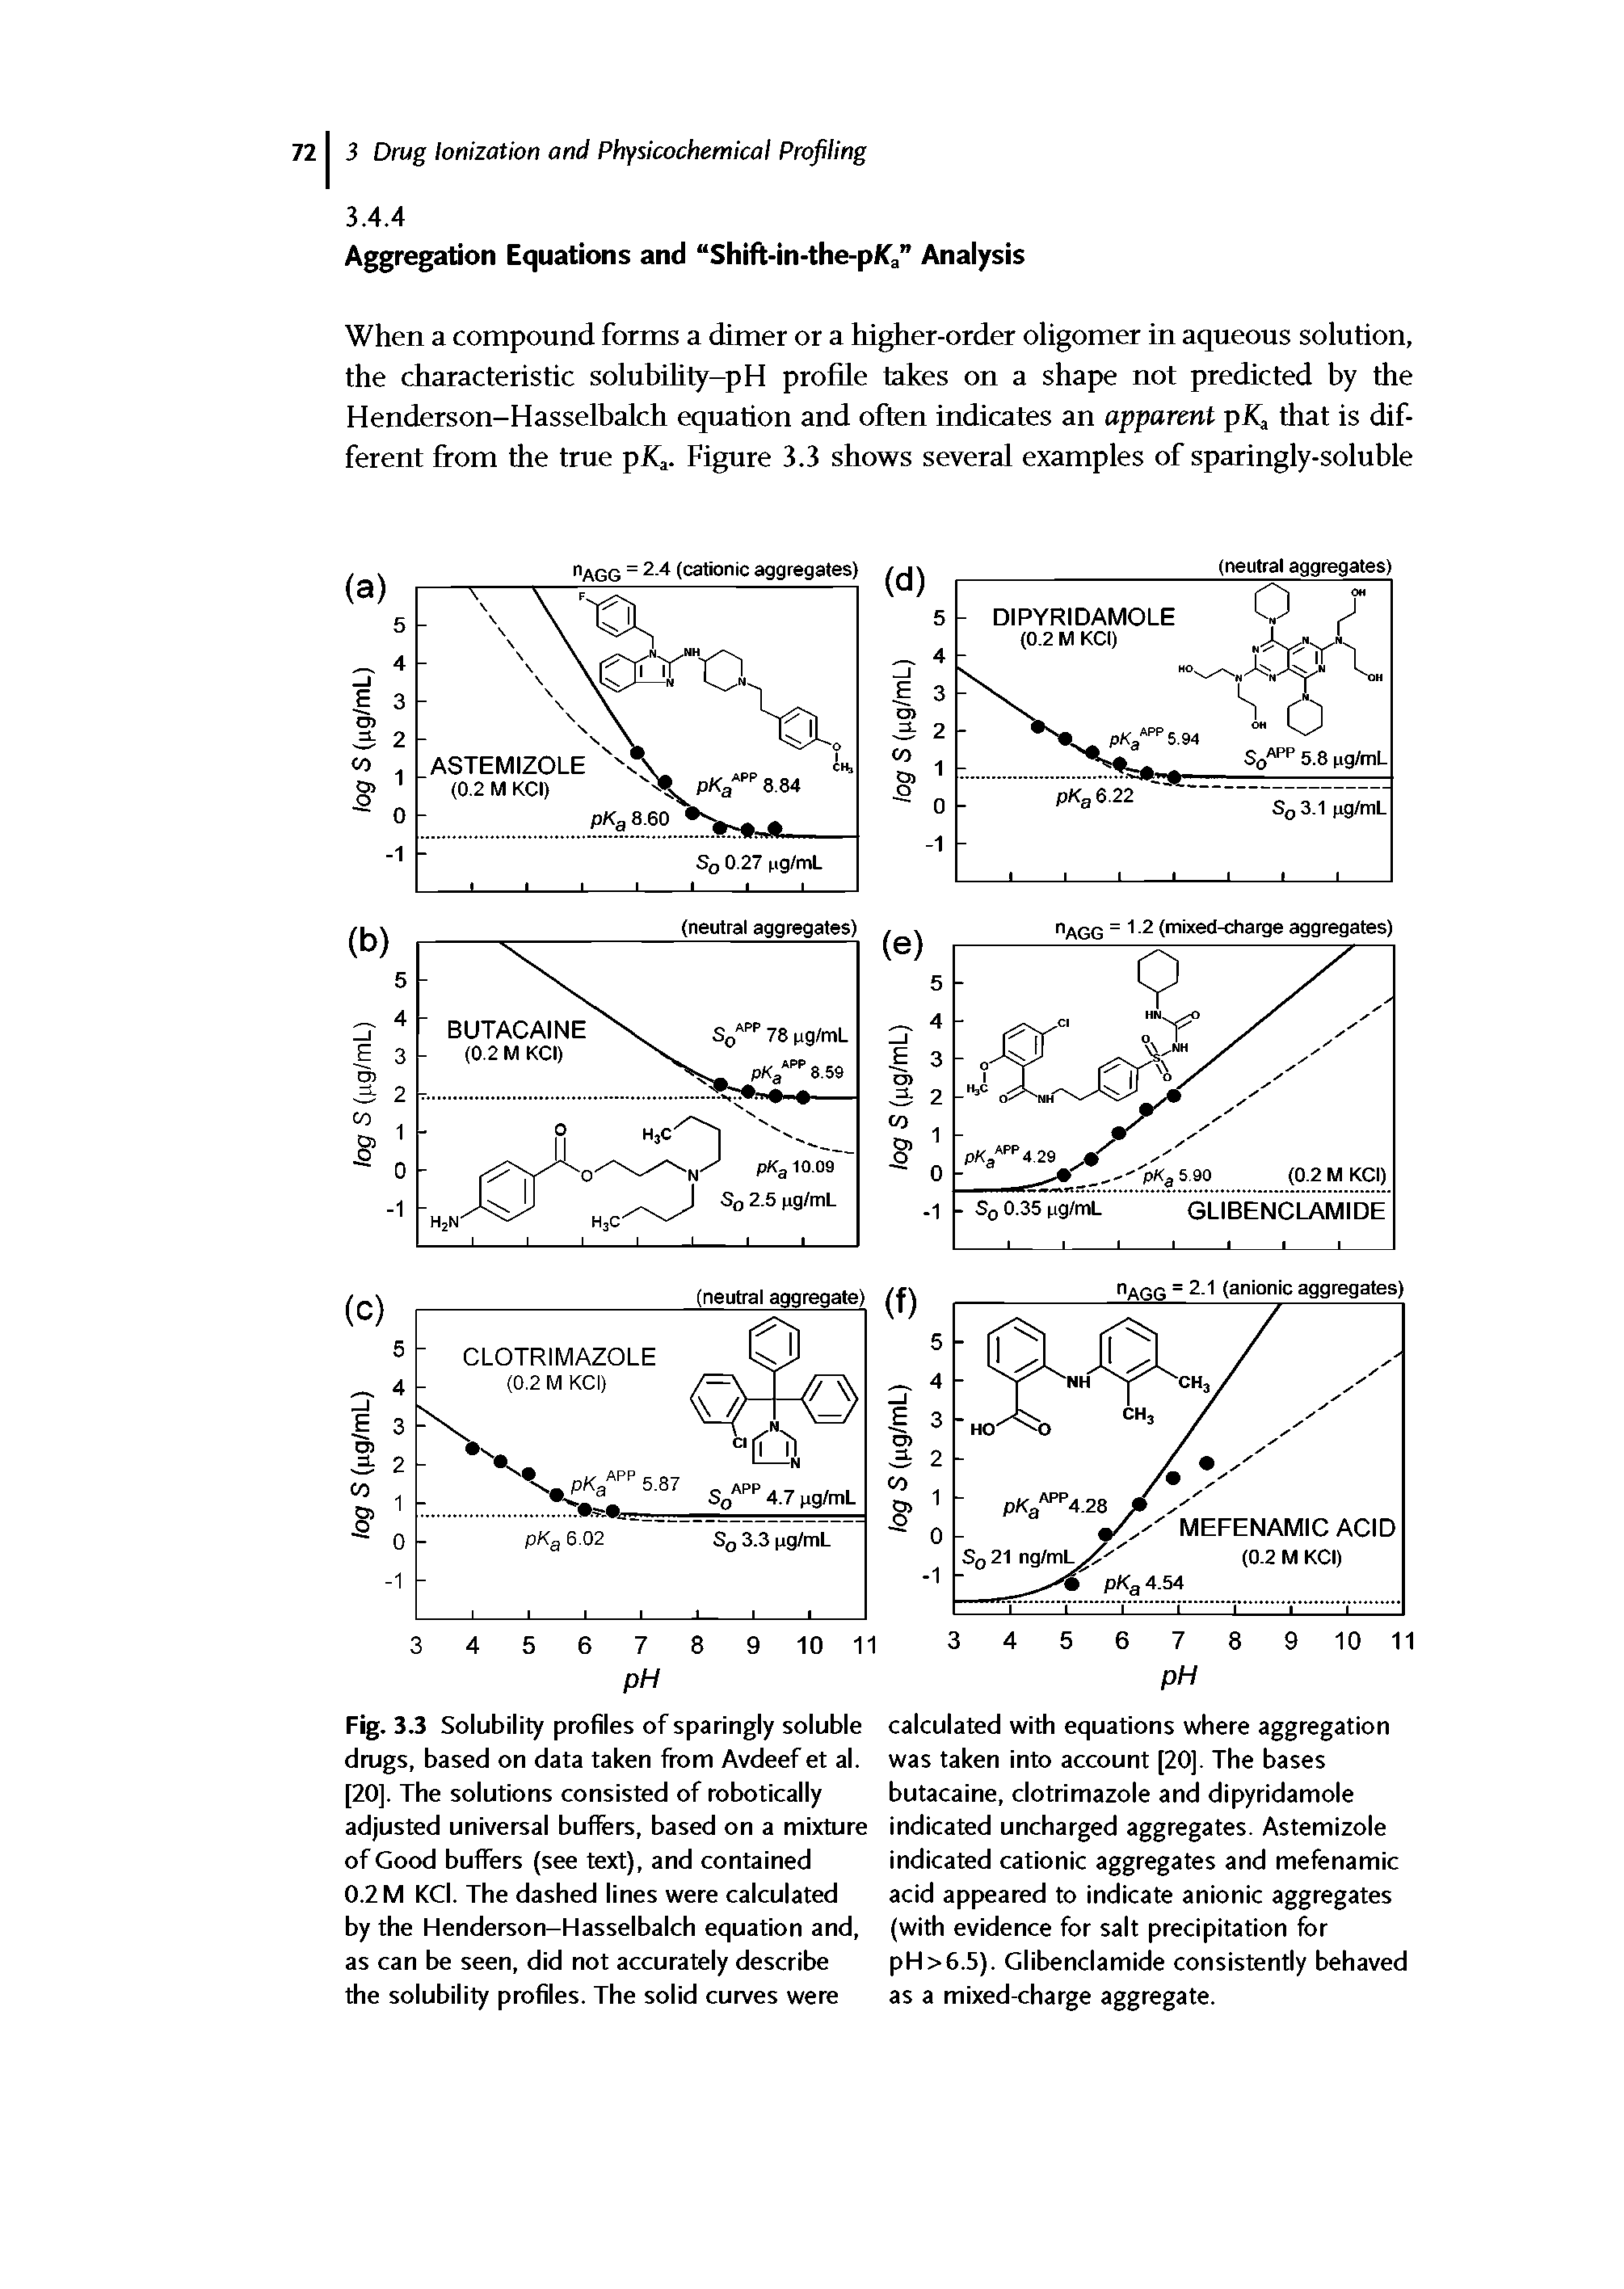 Fig. 3.3 Solubility profiles of sparingly soluble drugs, based on data taken from Avdeef et al. [20]. The solutions consisted of robotically adjusted universal buffers, based on a mixture of Good buffers (see text), and contained 0.2 M KCl. The dashed lines were calculated by the Henderson-Hasselbalch equation and, as can be seen, did not accurately describe the solubility profiles. The solid curves were...